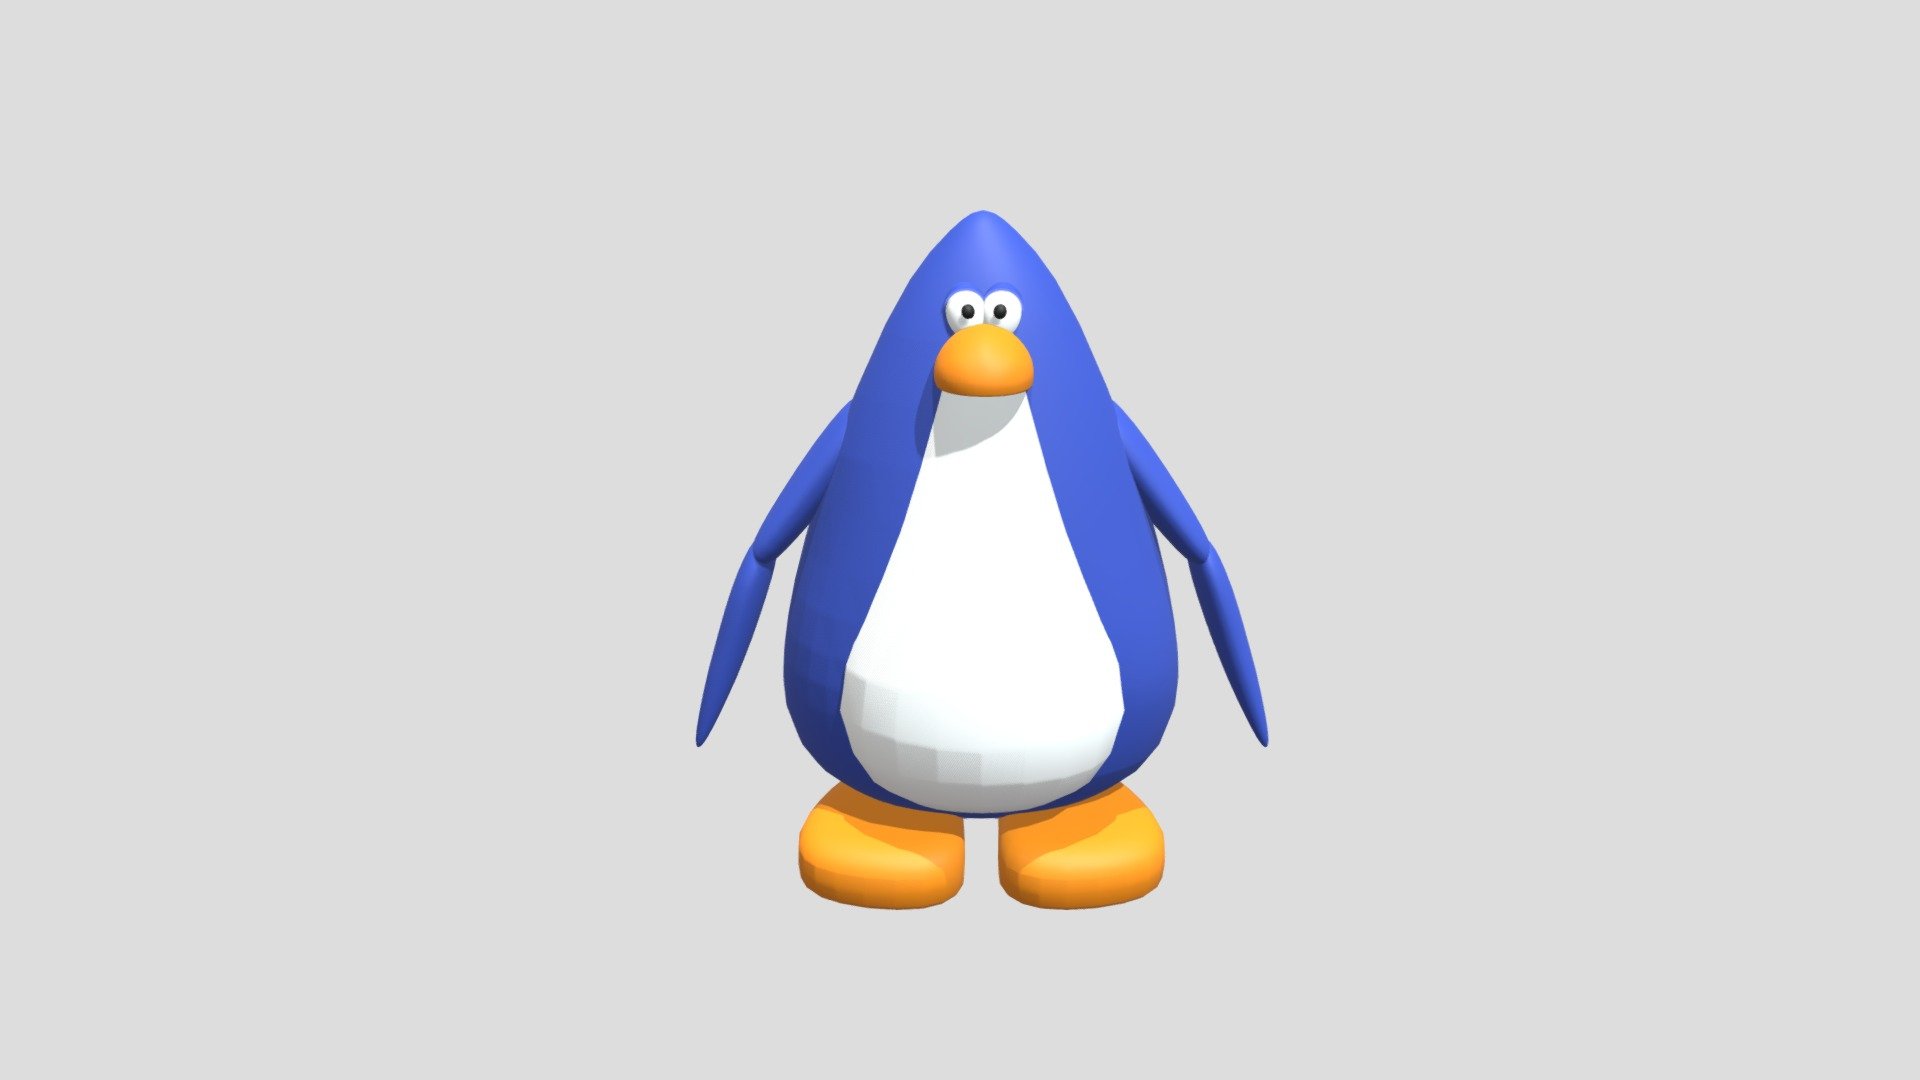 Welp, heres the penguin from club penguin
Made with/for Blender 2.79

PS: The toon shading doesn't appear in the model preview
but it will be there when you download the model

CREDIT ME IF YOU USE THIS FOR CHRIST SAKE I'VE HAD PROBLEMS WITH PEOPLE STEALING MY MODELS BEFORE

Disclaimer: I don't own Club Penguin nor any assets from the game - Club Penguin recreation - Download Free 3D model by LukeTheLPSWolf 3d model